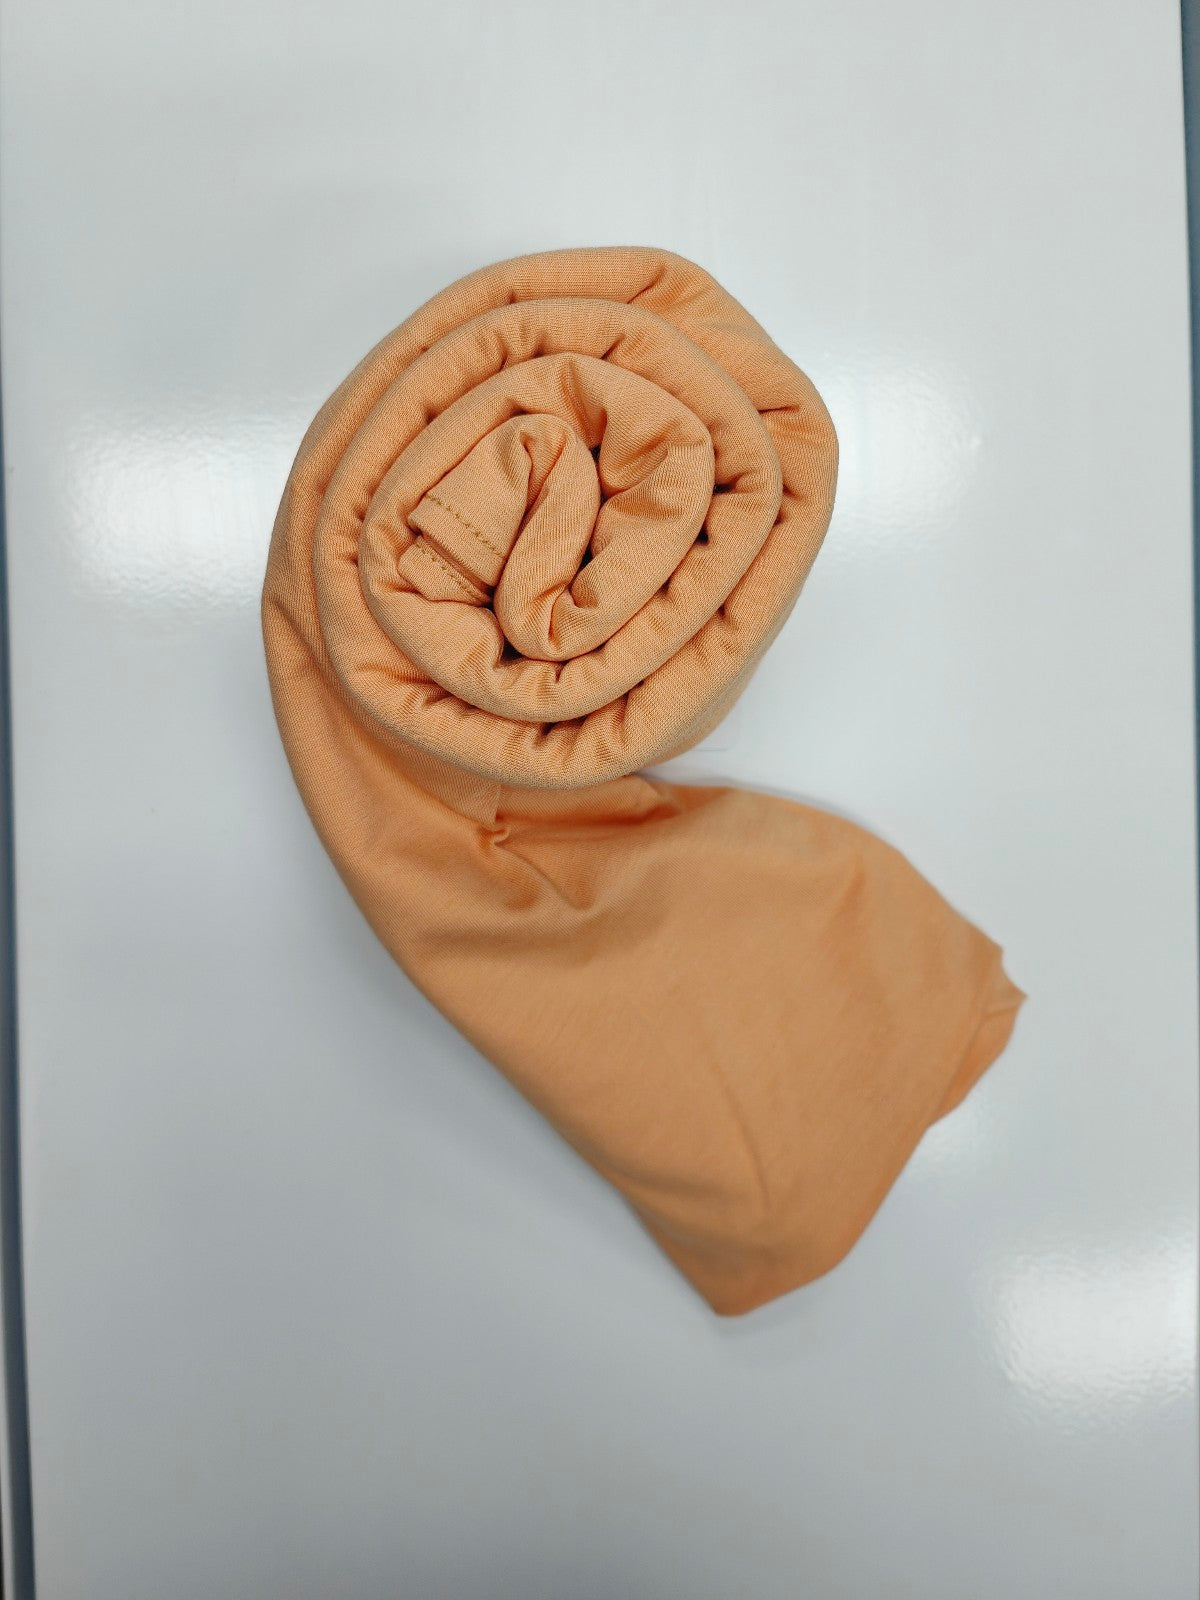 Discover the pinnacle of elegance and comfort with our Tangerine Pure Bamboo Hijab, exclusively offered by Hikmah Boutique. This hijab seamlessly merges style, breathability, and eco-friendliness, making it the ideal choice for any occasion. Stay cool and confident with Hikmah Boutique's Premium Quality Hijabs.